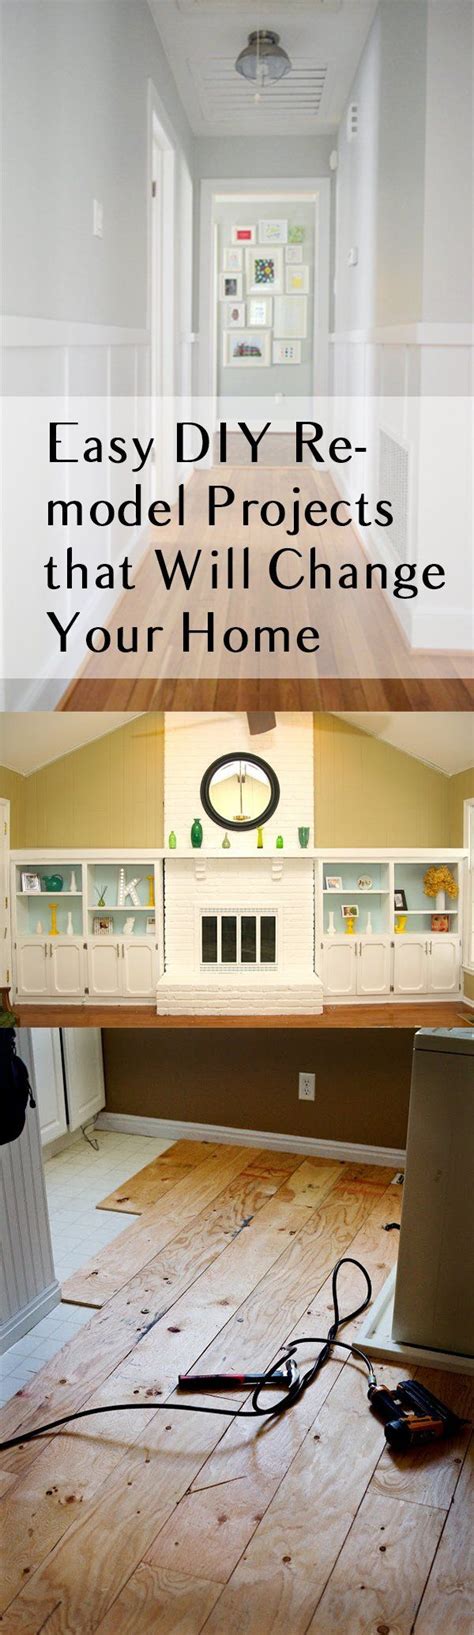 Super Easy Diy Projects That Make A Huge Difference In Your Home Home